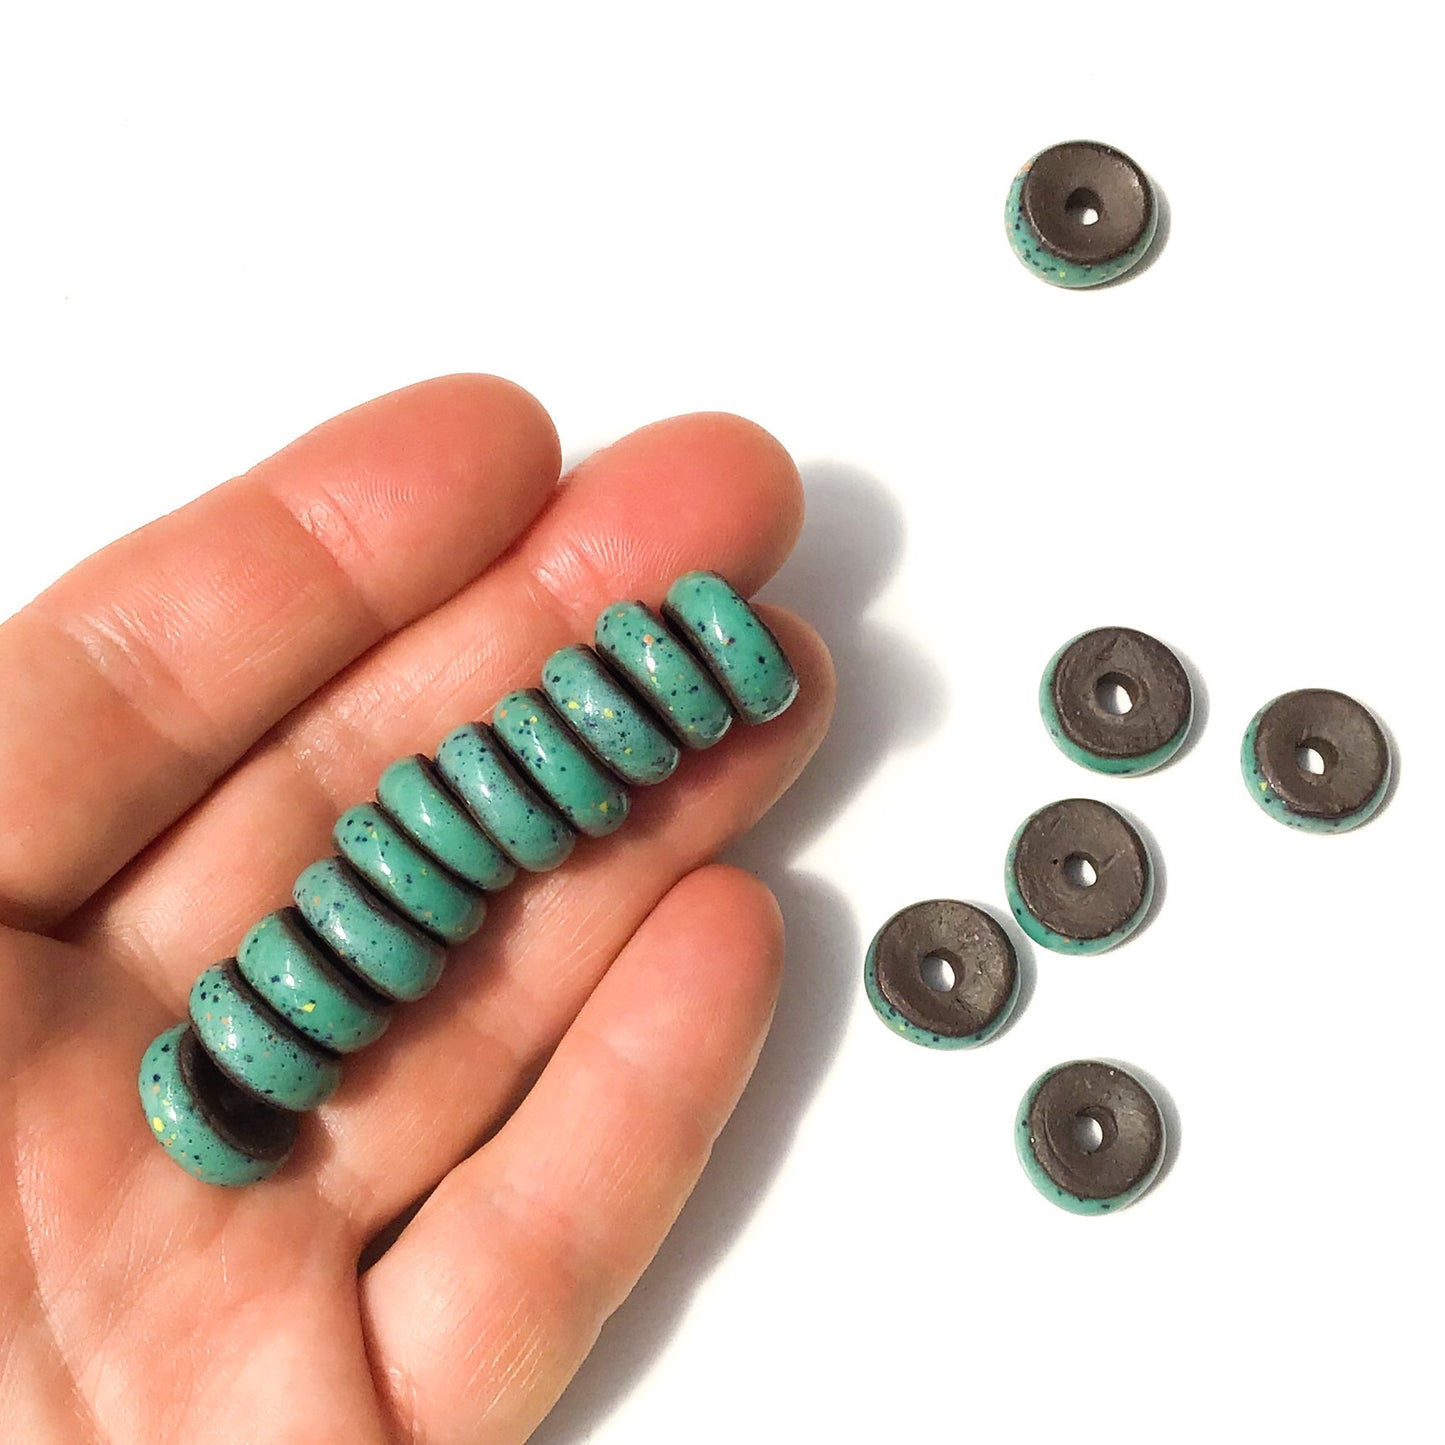 Black Clay Beads - Speckled Turquoise Pottery Beads